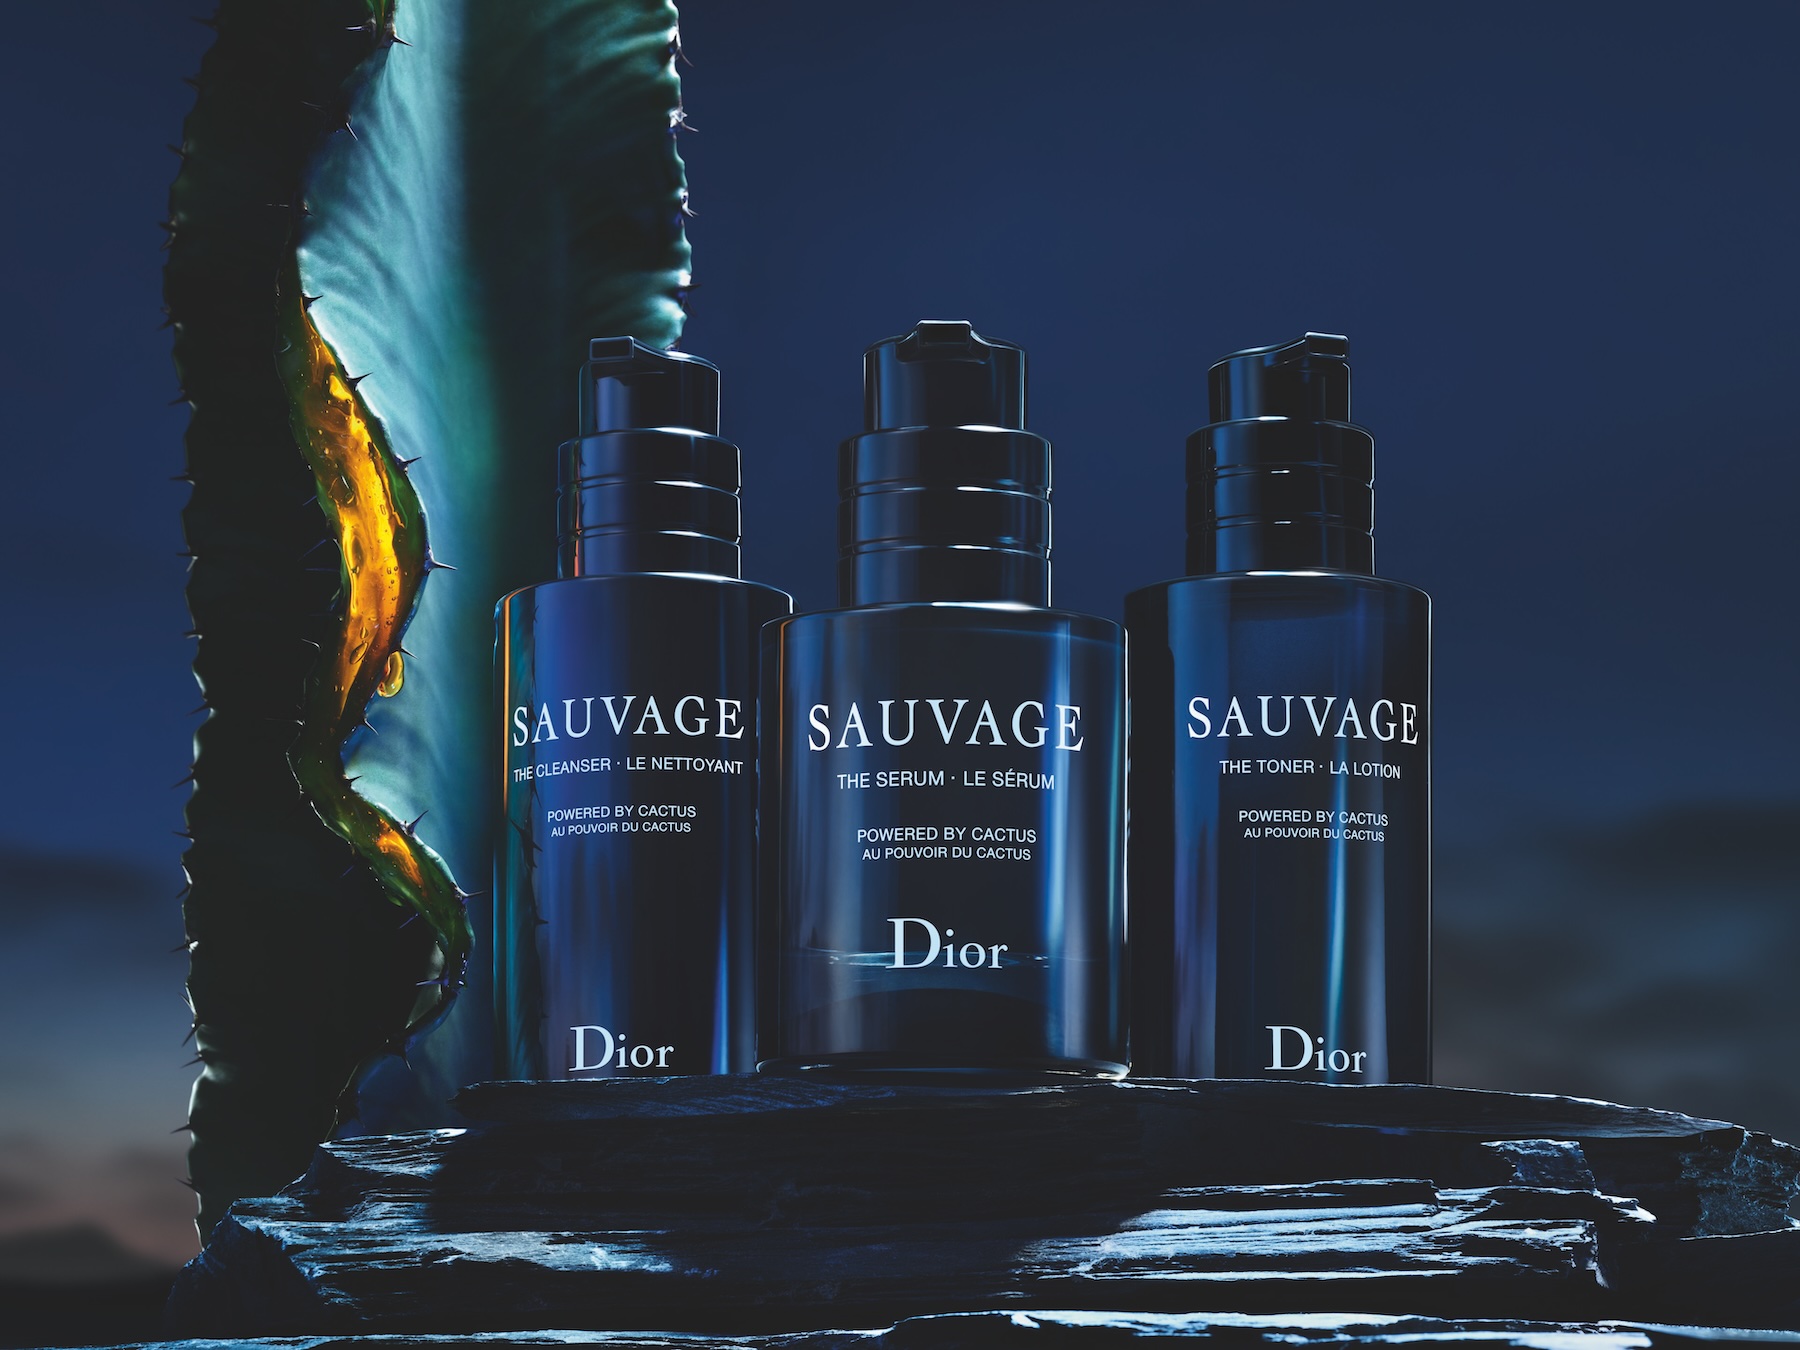 Dior beauty's Sauvage mencare skincare collection line made from Cactus new.